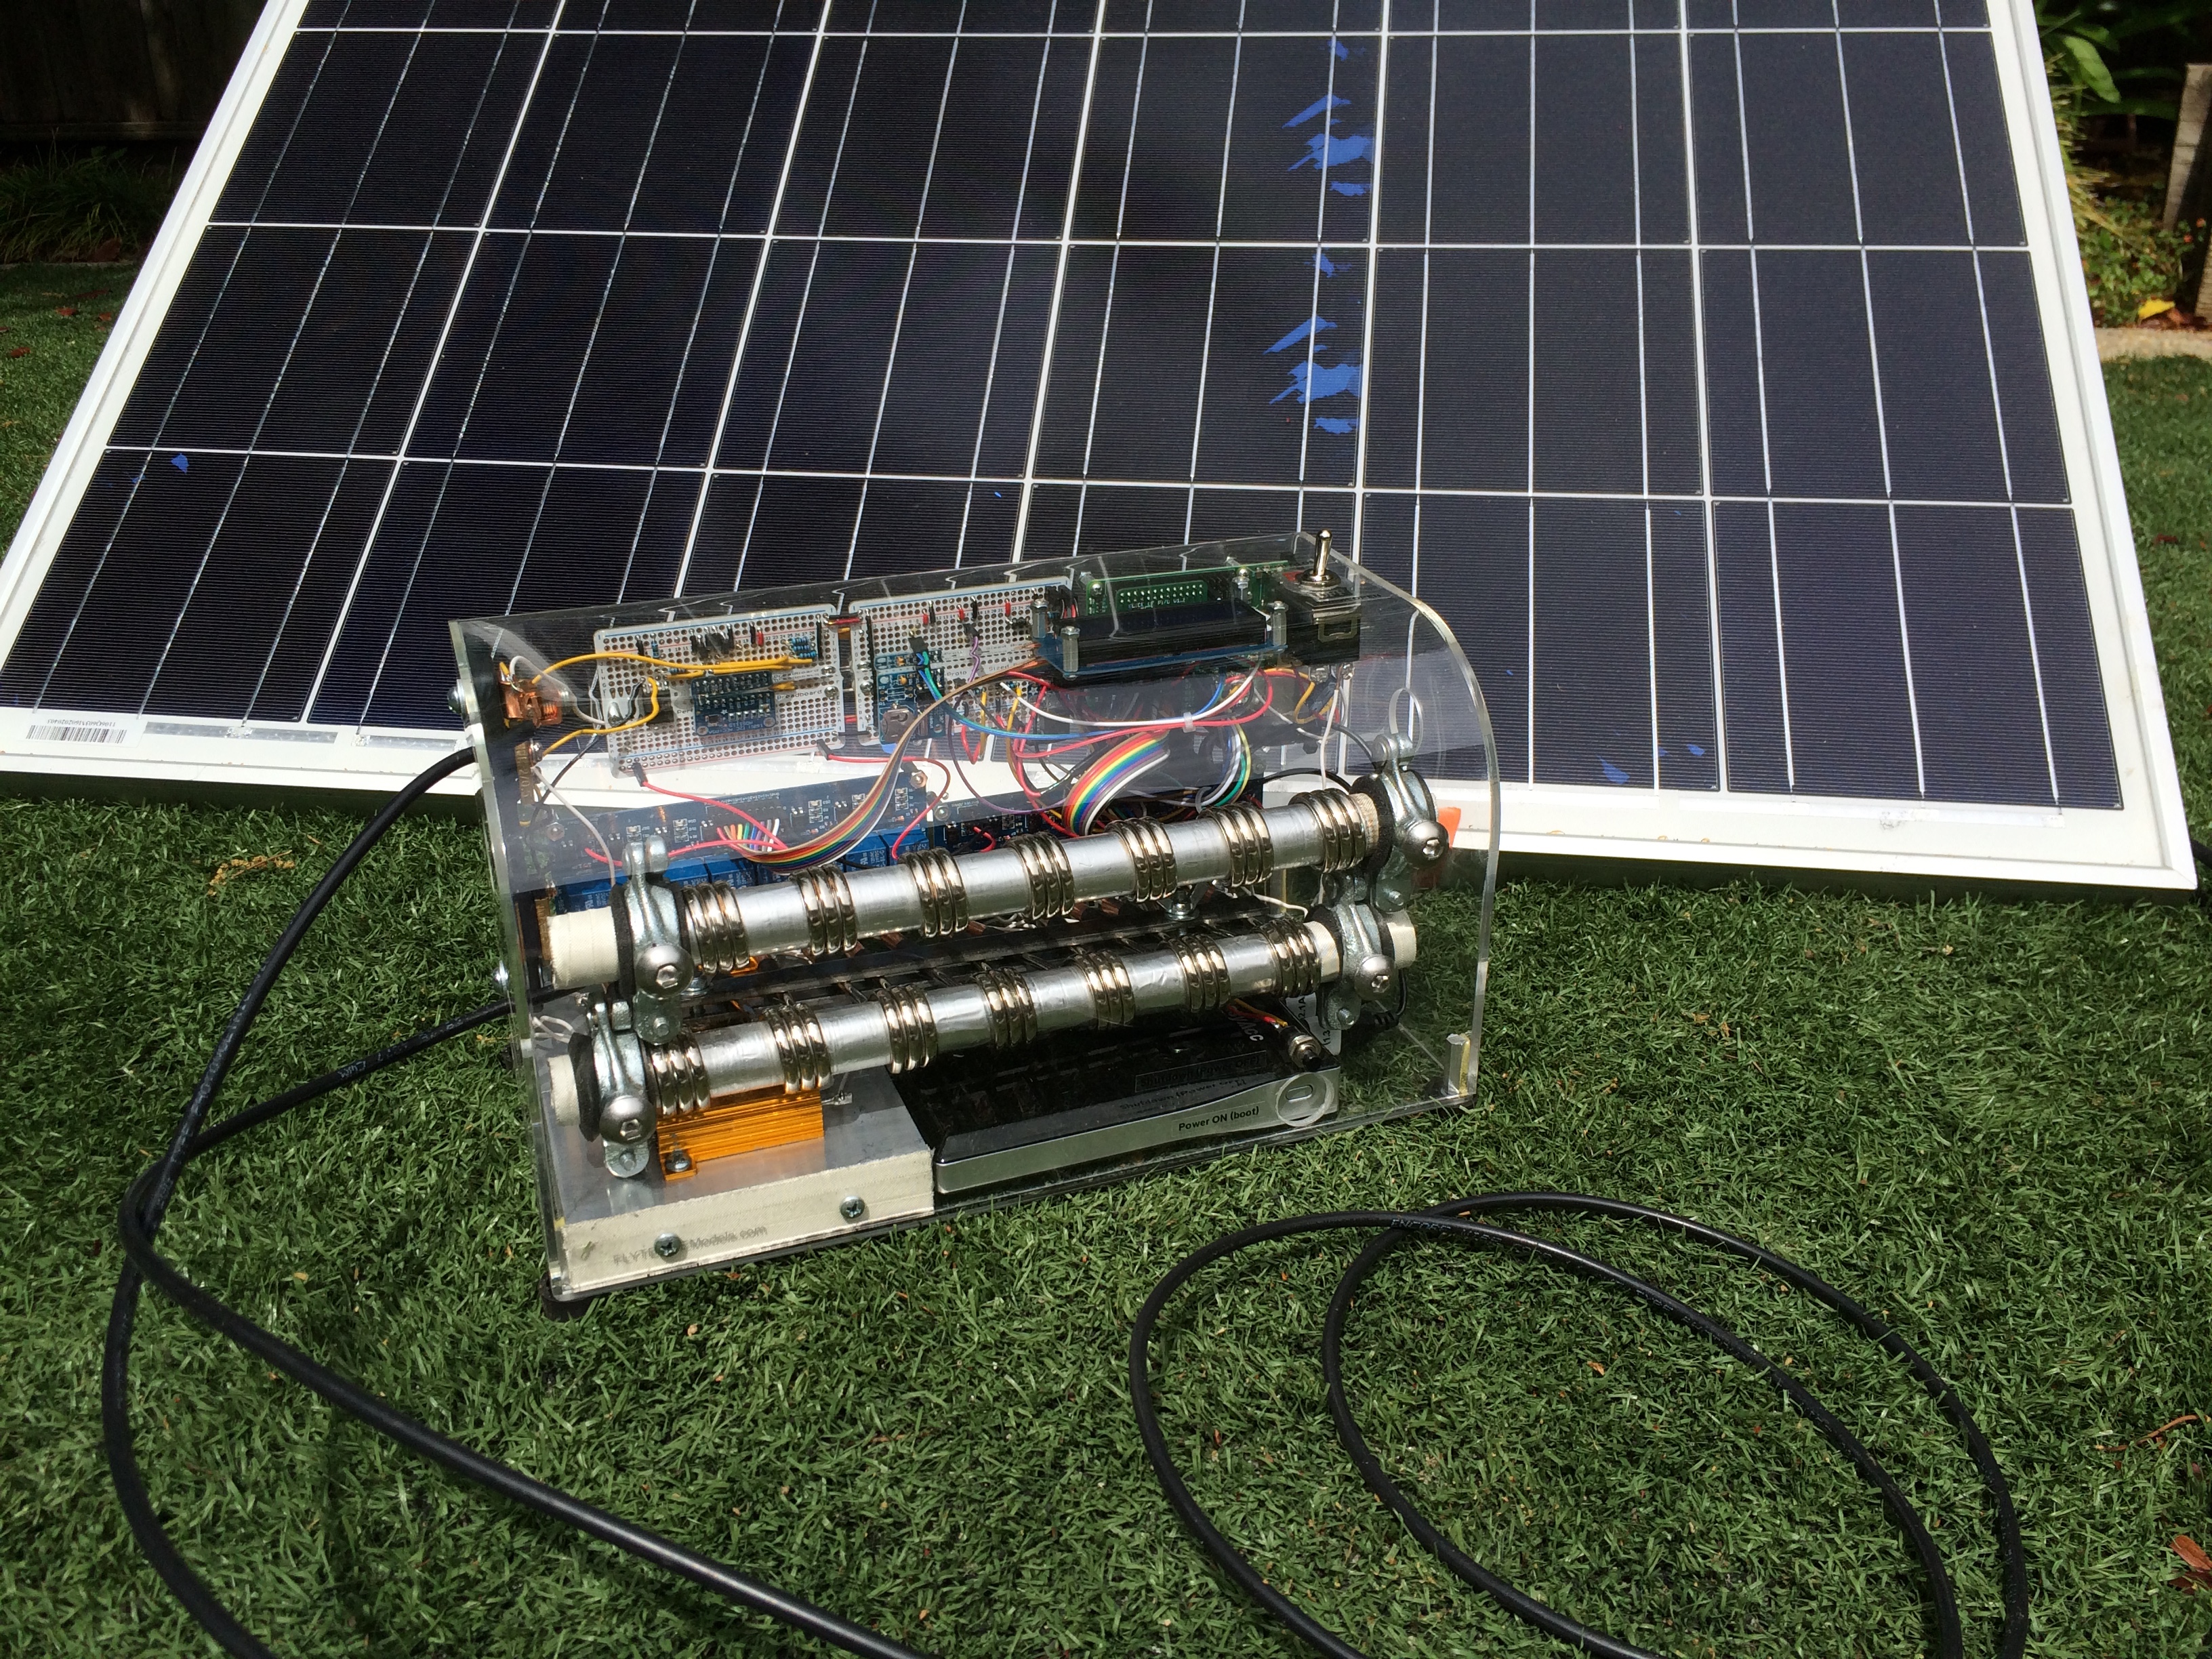 Collect Solar Panel Data with an IV Swinger Curve Tracer